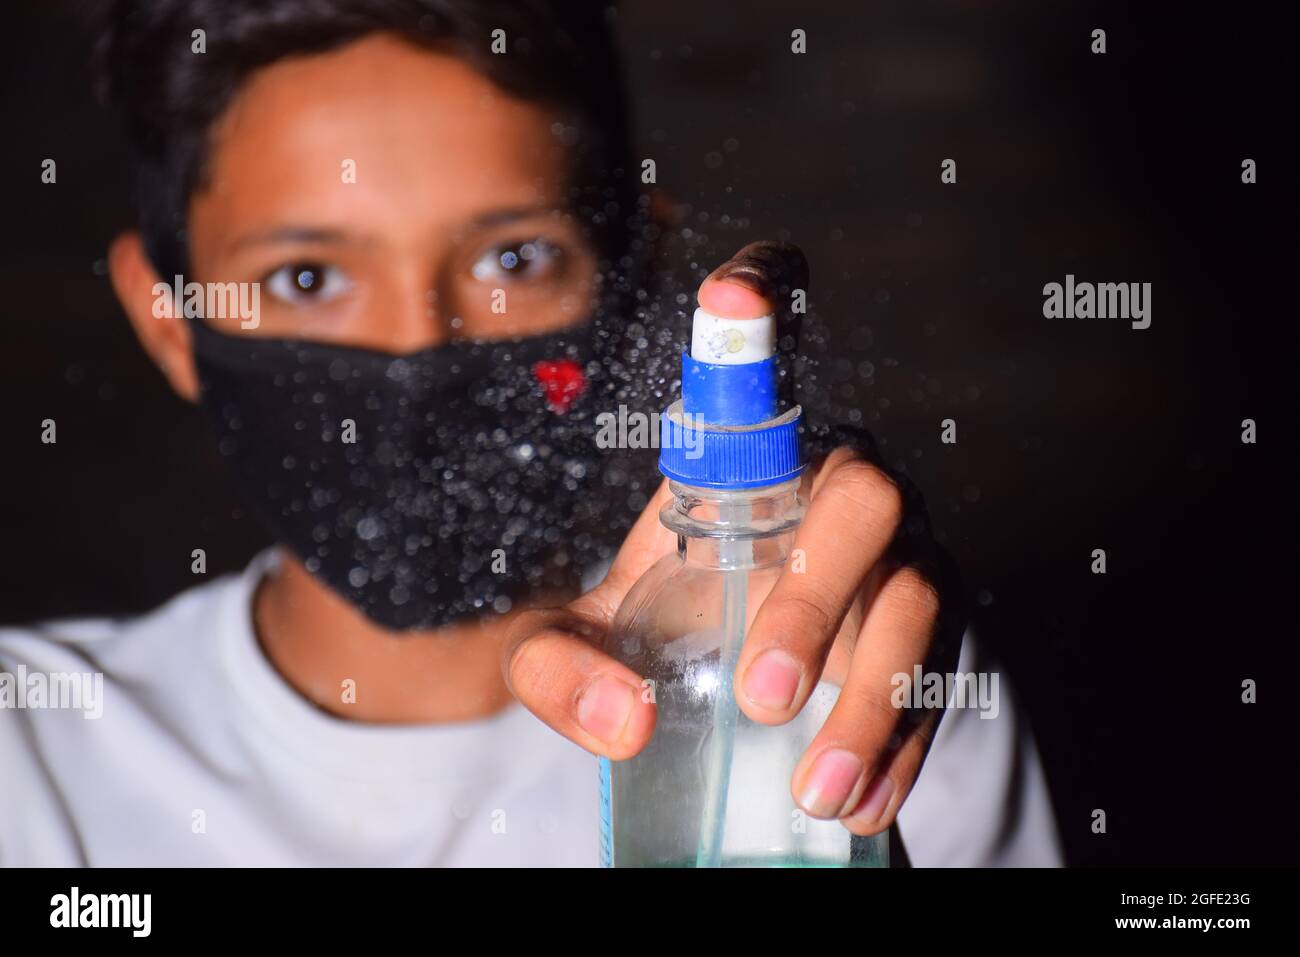 boy with alcohol gel or antibacterial soap sanitizer.Hygiene concept. prevent the spread of germs and bacteria and avoid infections corona virus Stock Photo